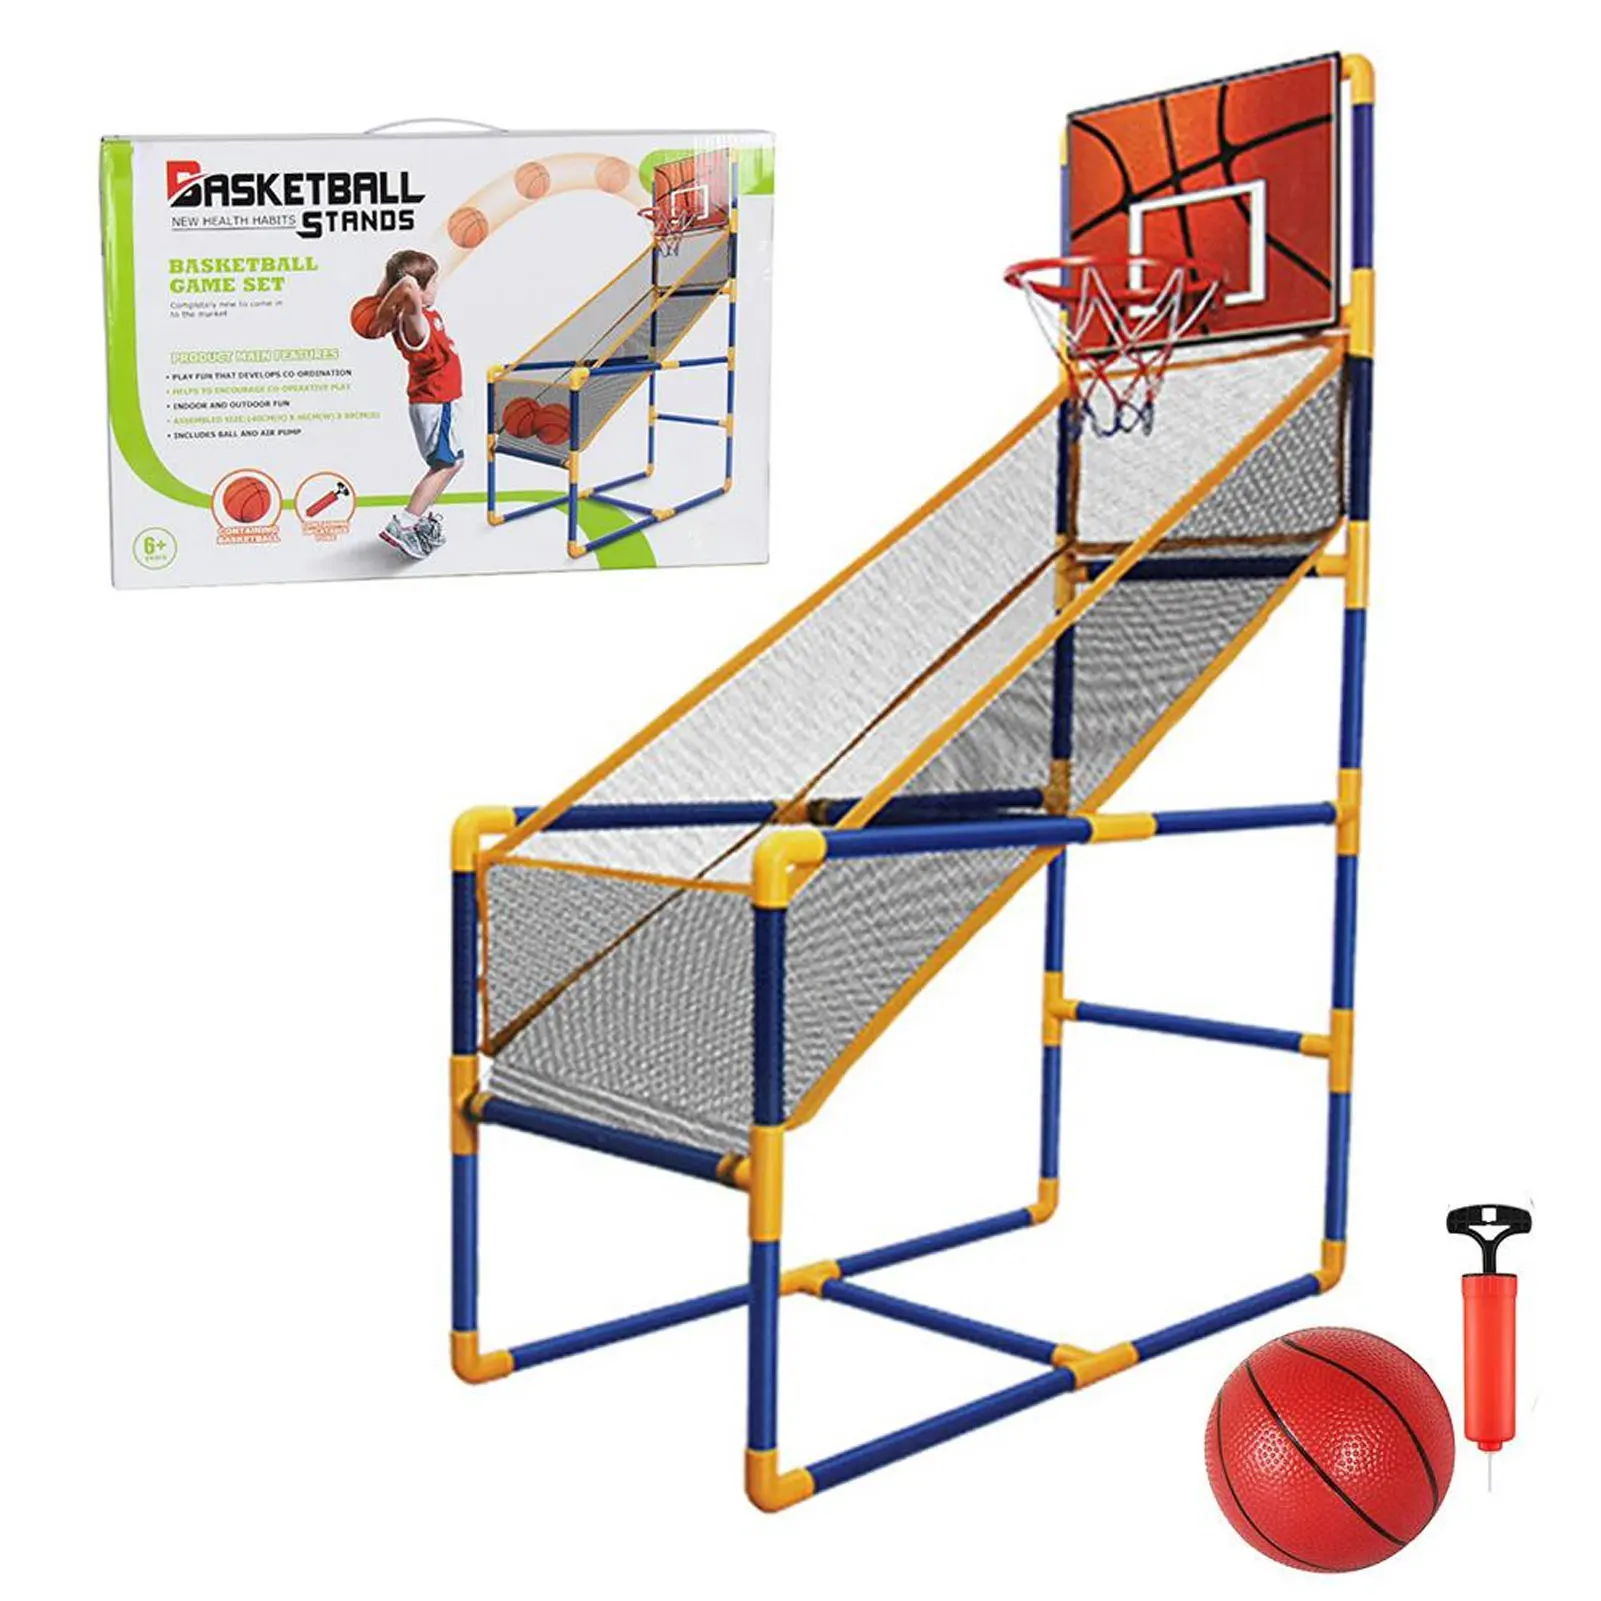 Children's Indoor Outdoor Shooting Machine Basketball Playing Set Arcade Game Basketball Training Toy For Children Educational